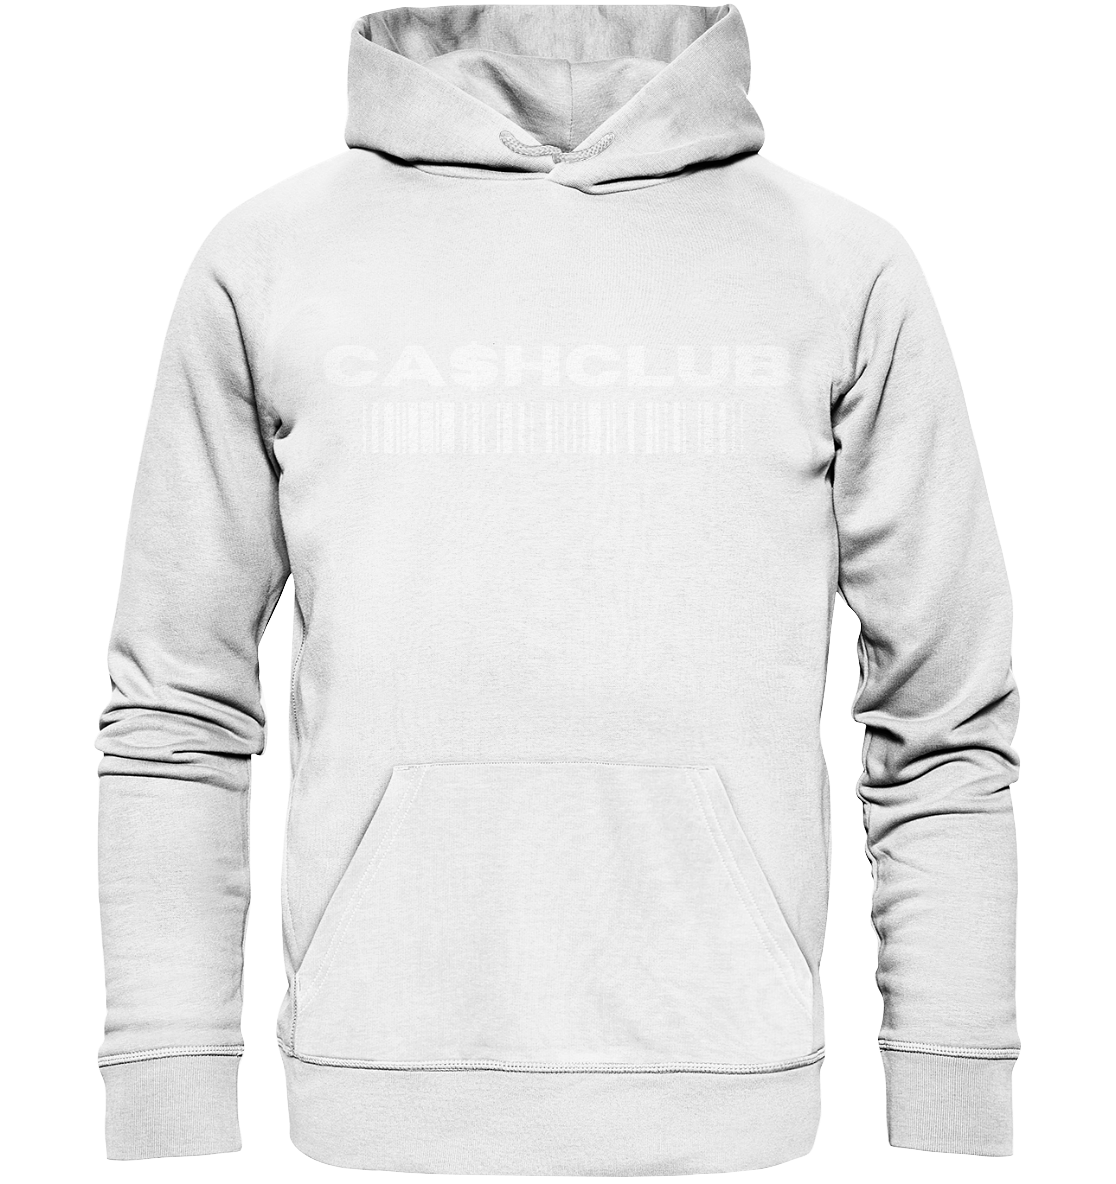 CA$H CLUB COLLECTION by LIMITLOS - Organic Hoodie